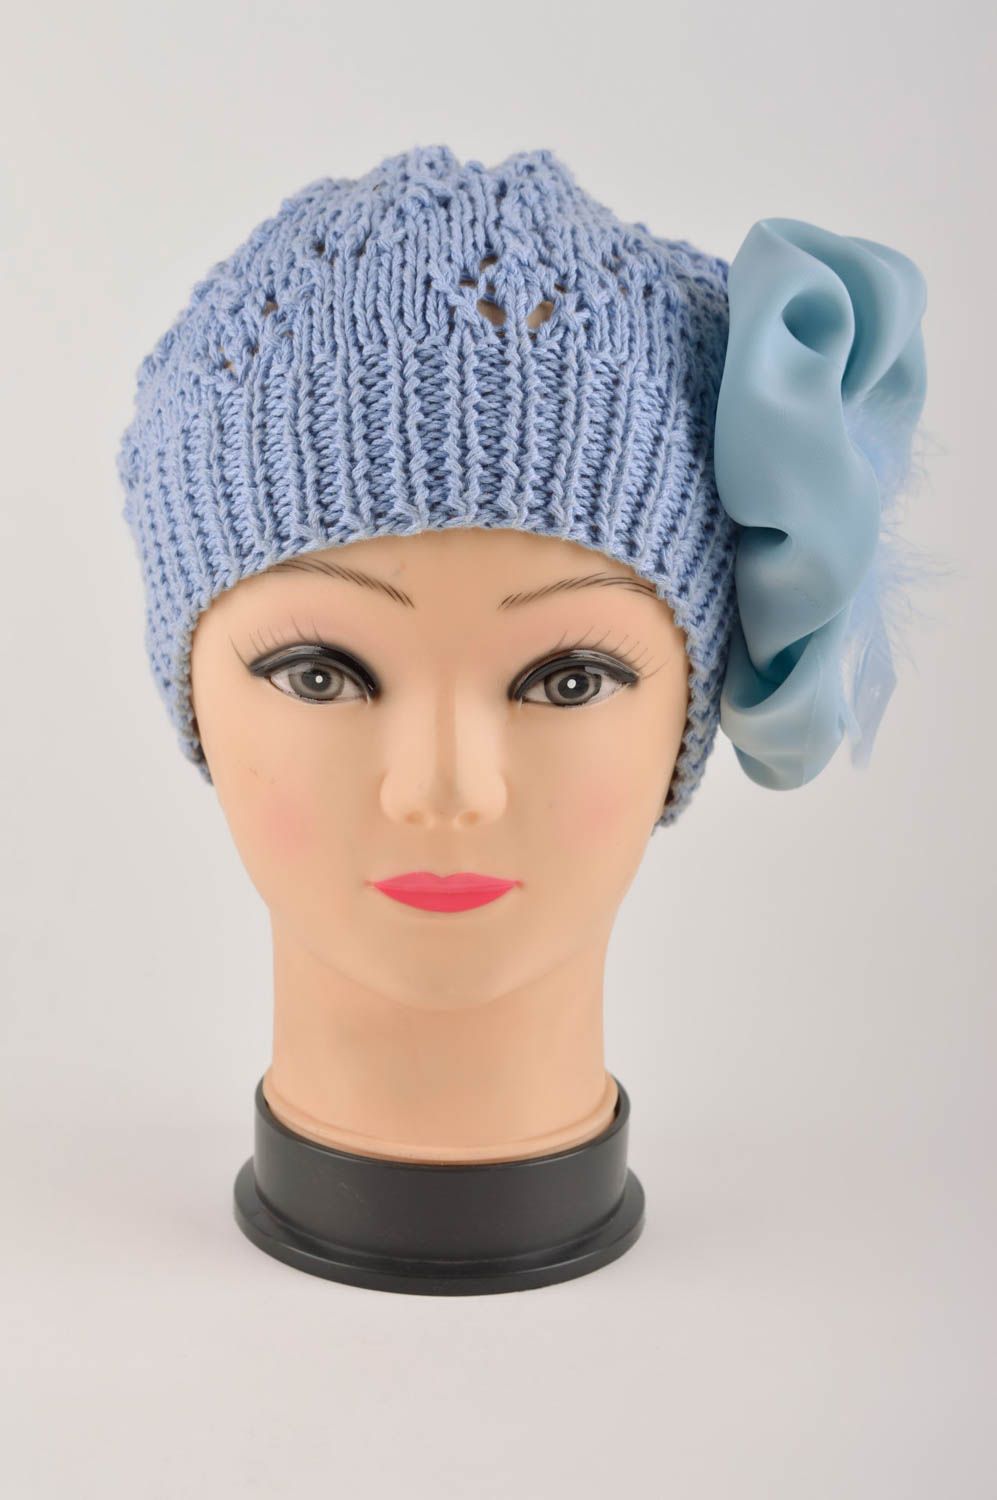 Handmade ladies hat knitted hat designer accessories fashion hats gifts for her photo 3